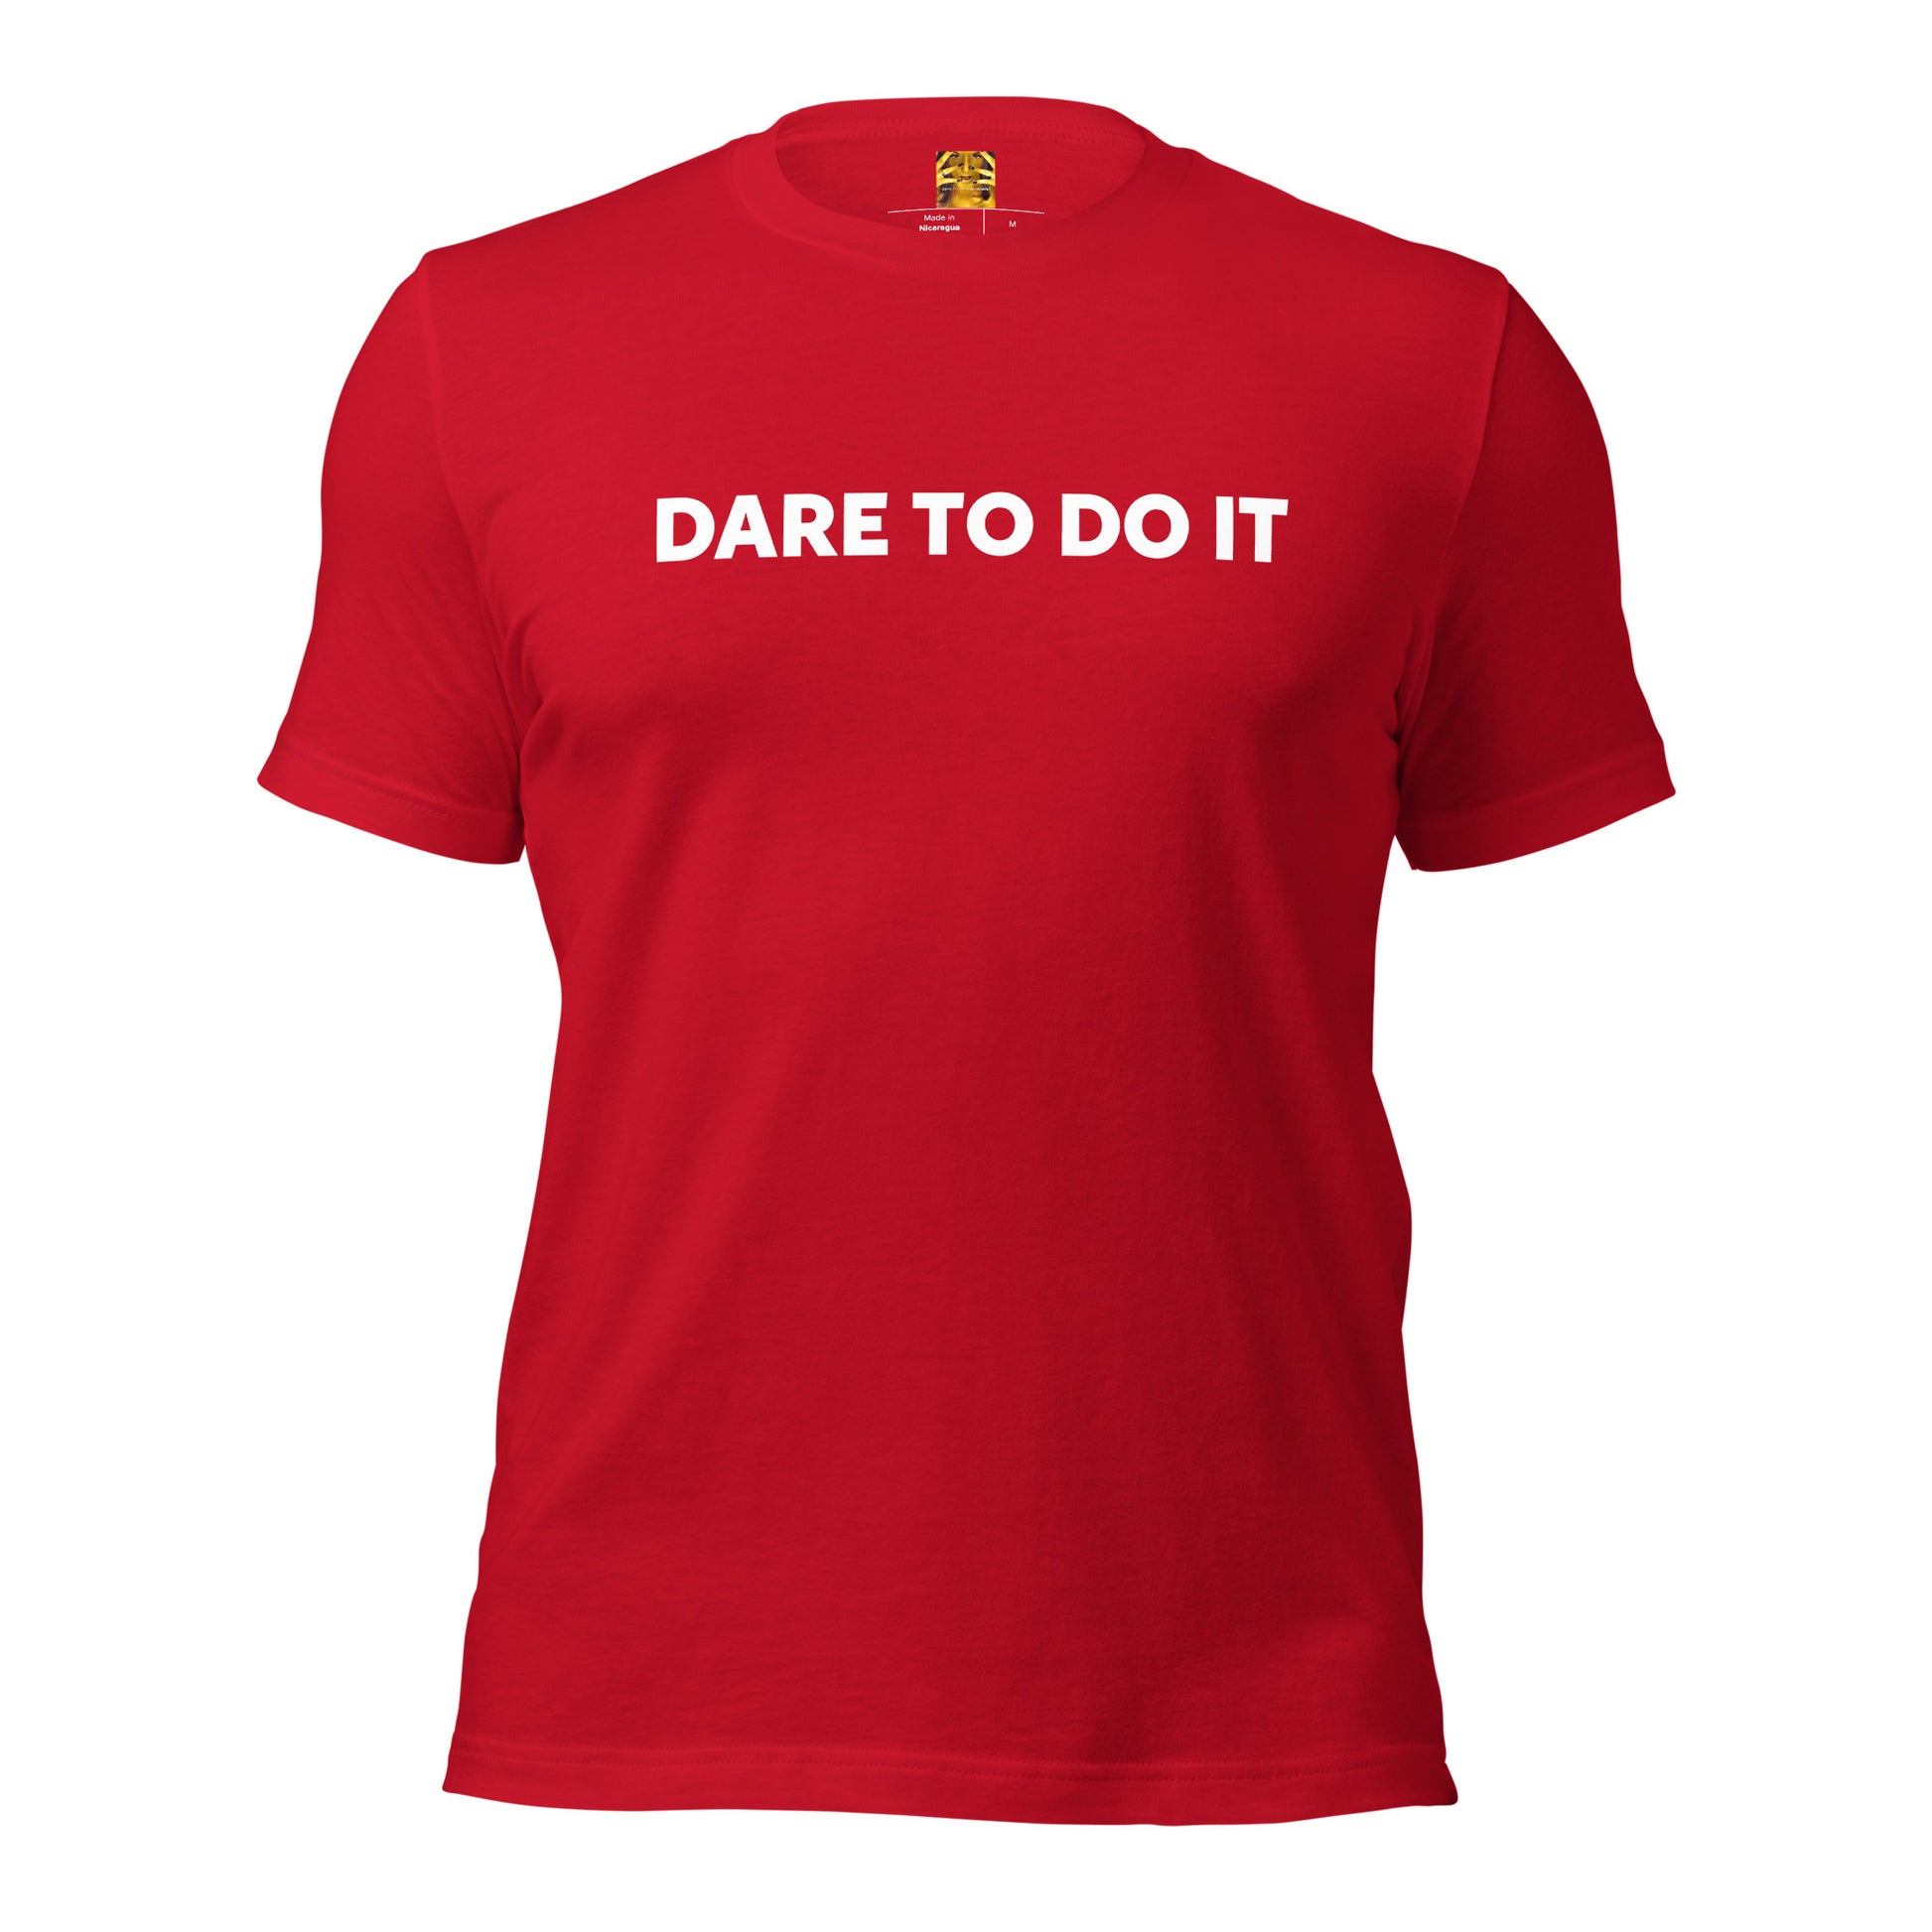 Dare to do it motivate merch from SpotlYght Seeier for the artist whos birthright is the spotlight